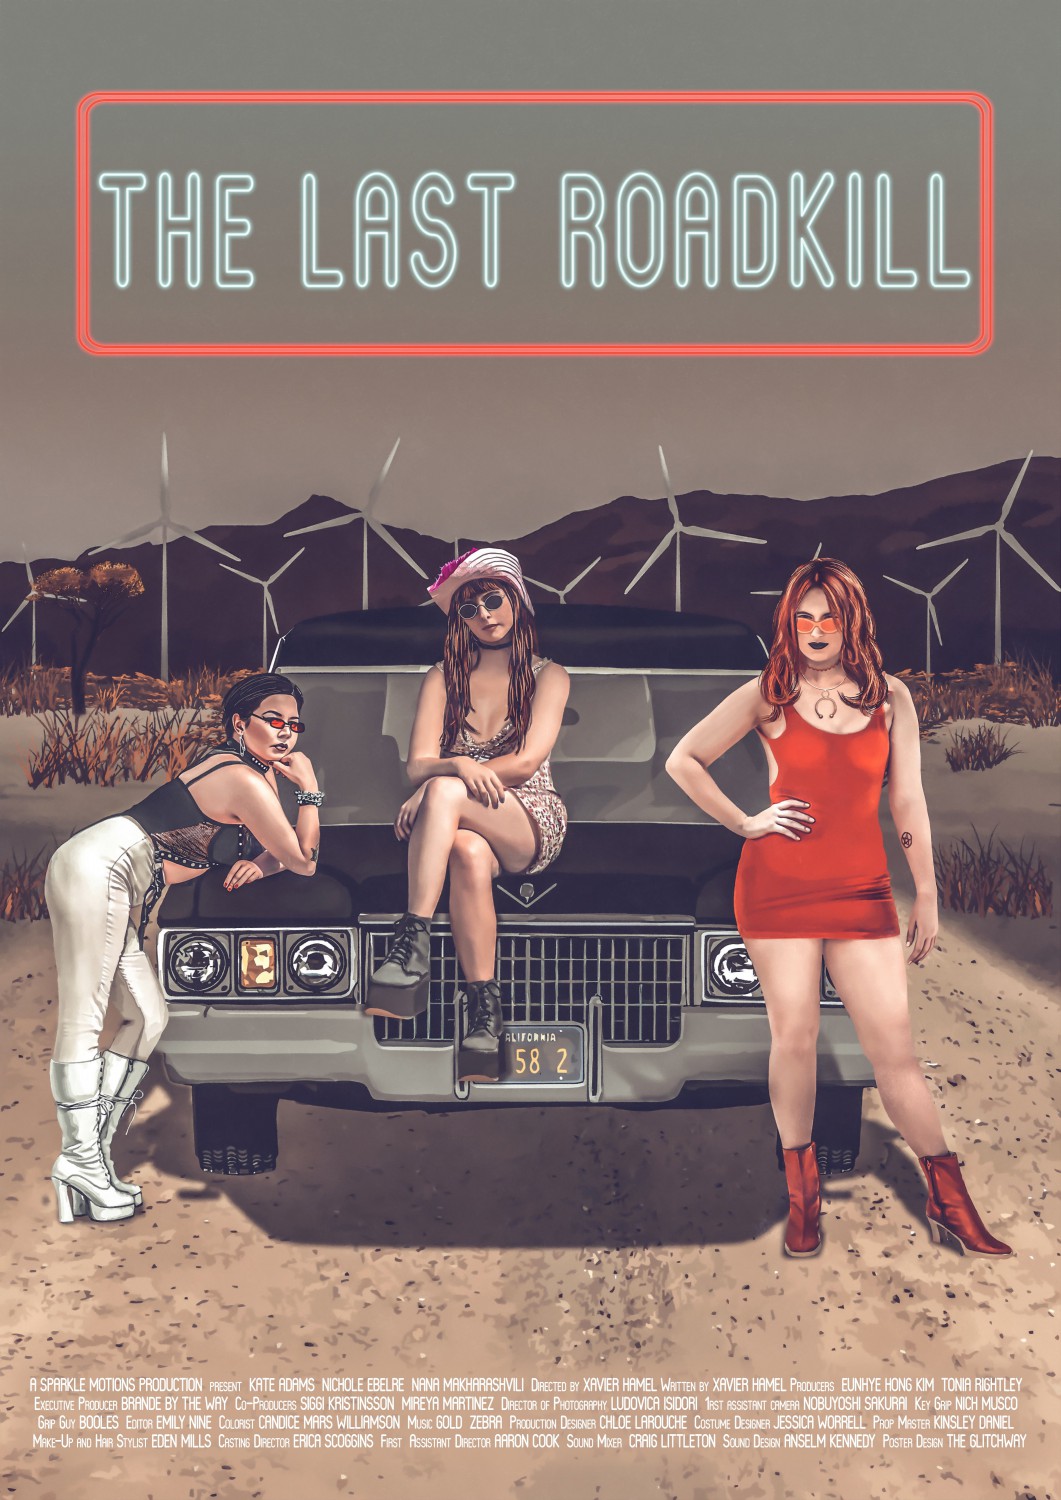 Extra Large Movie Poster Image for The Last Roadkill